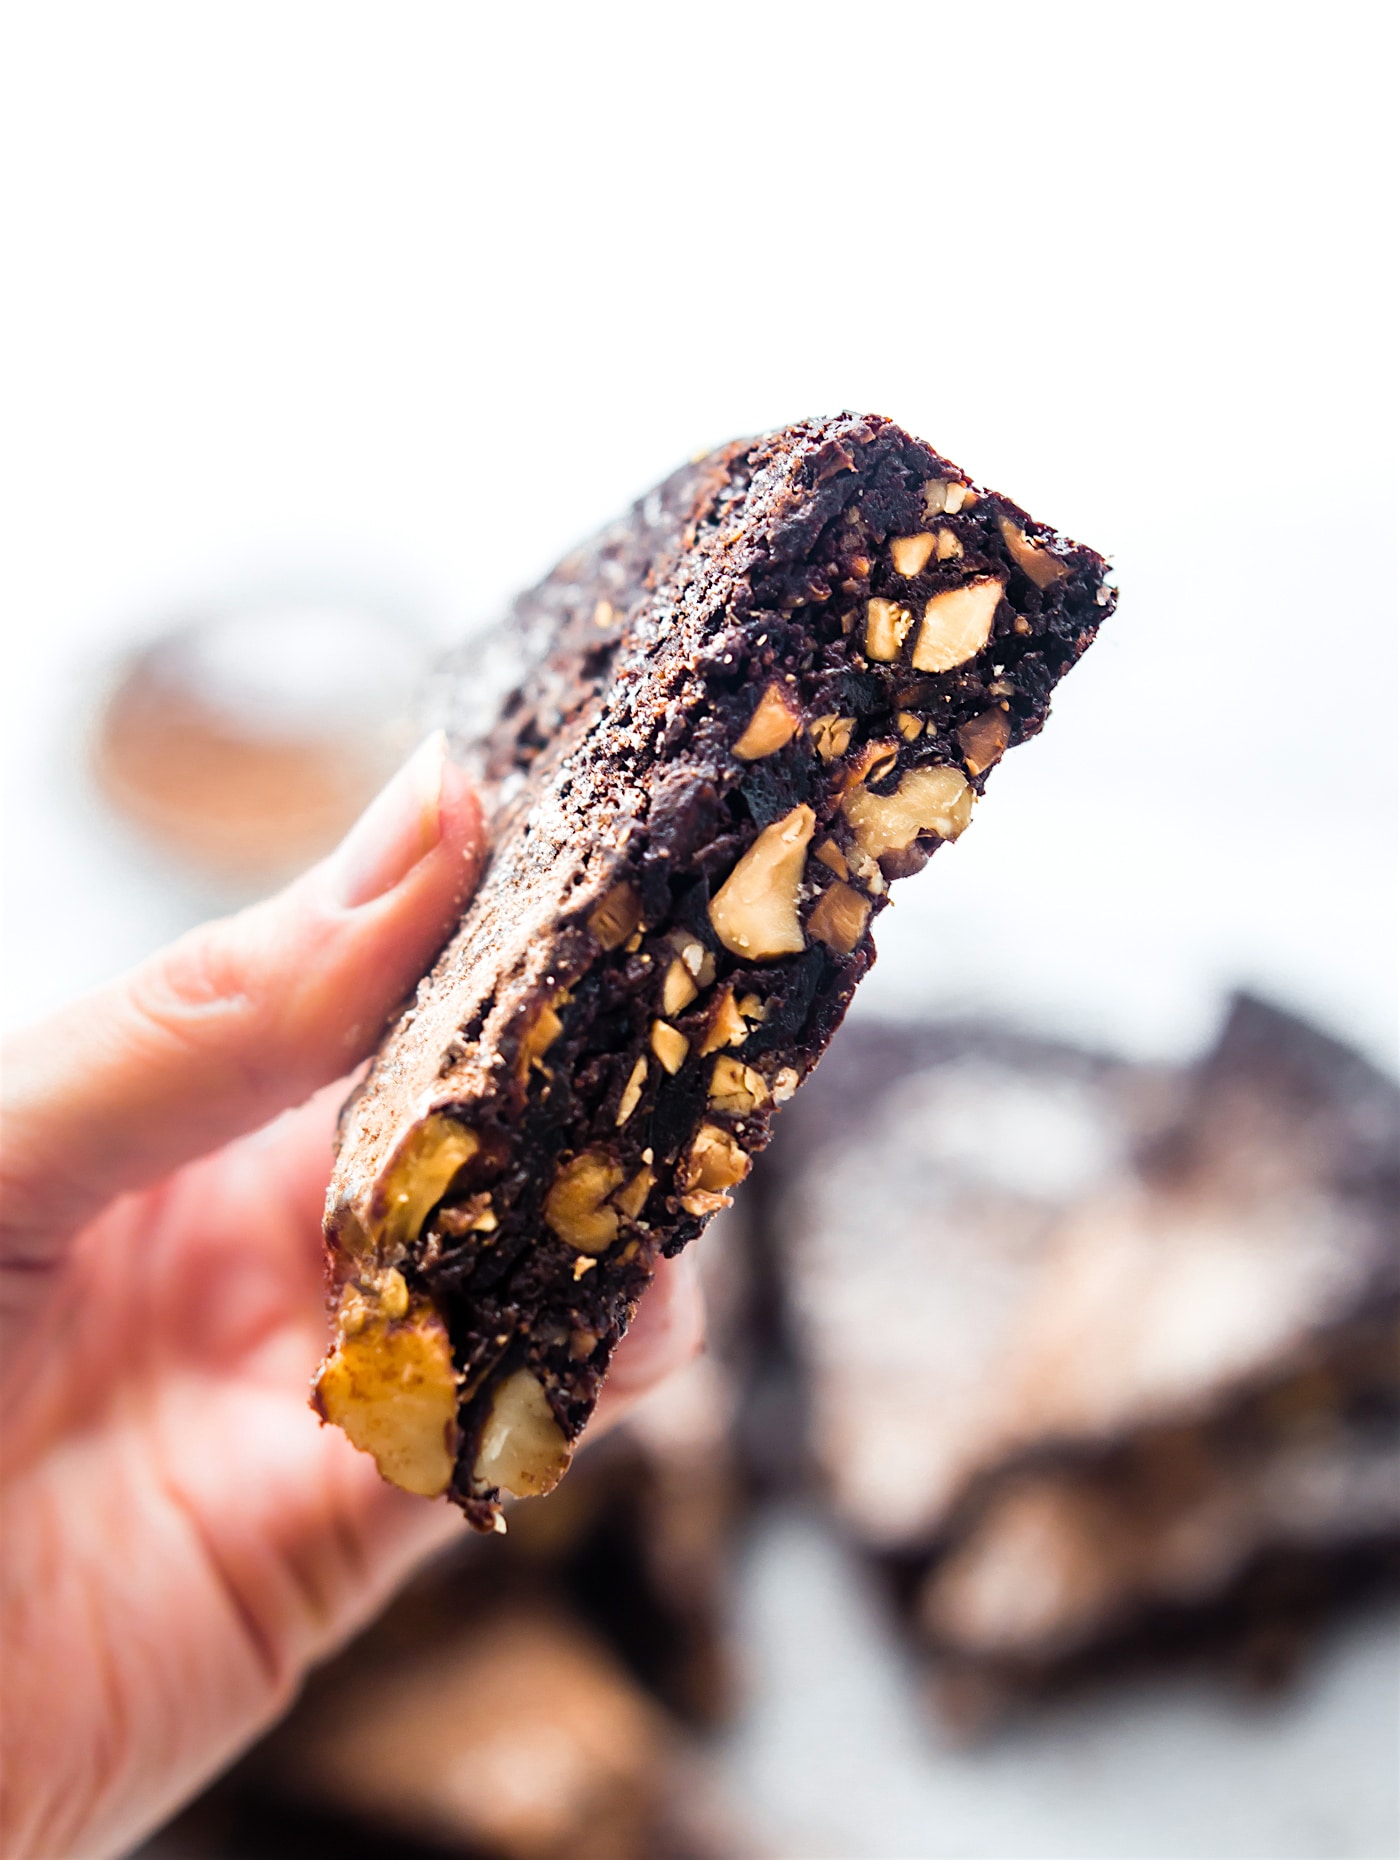 A hand holding a slice of chocolate Christmas cake with nuts